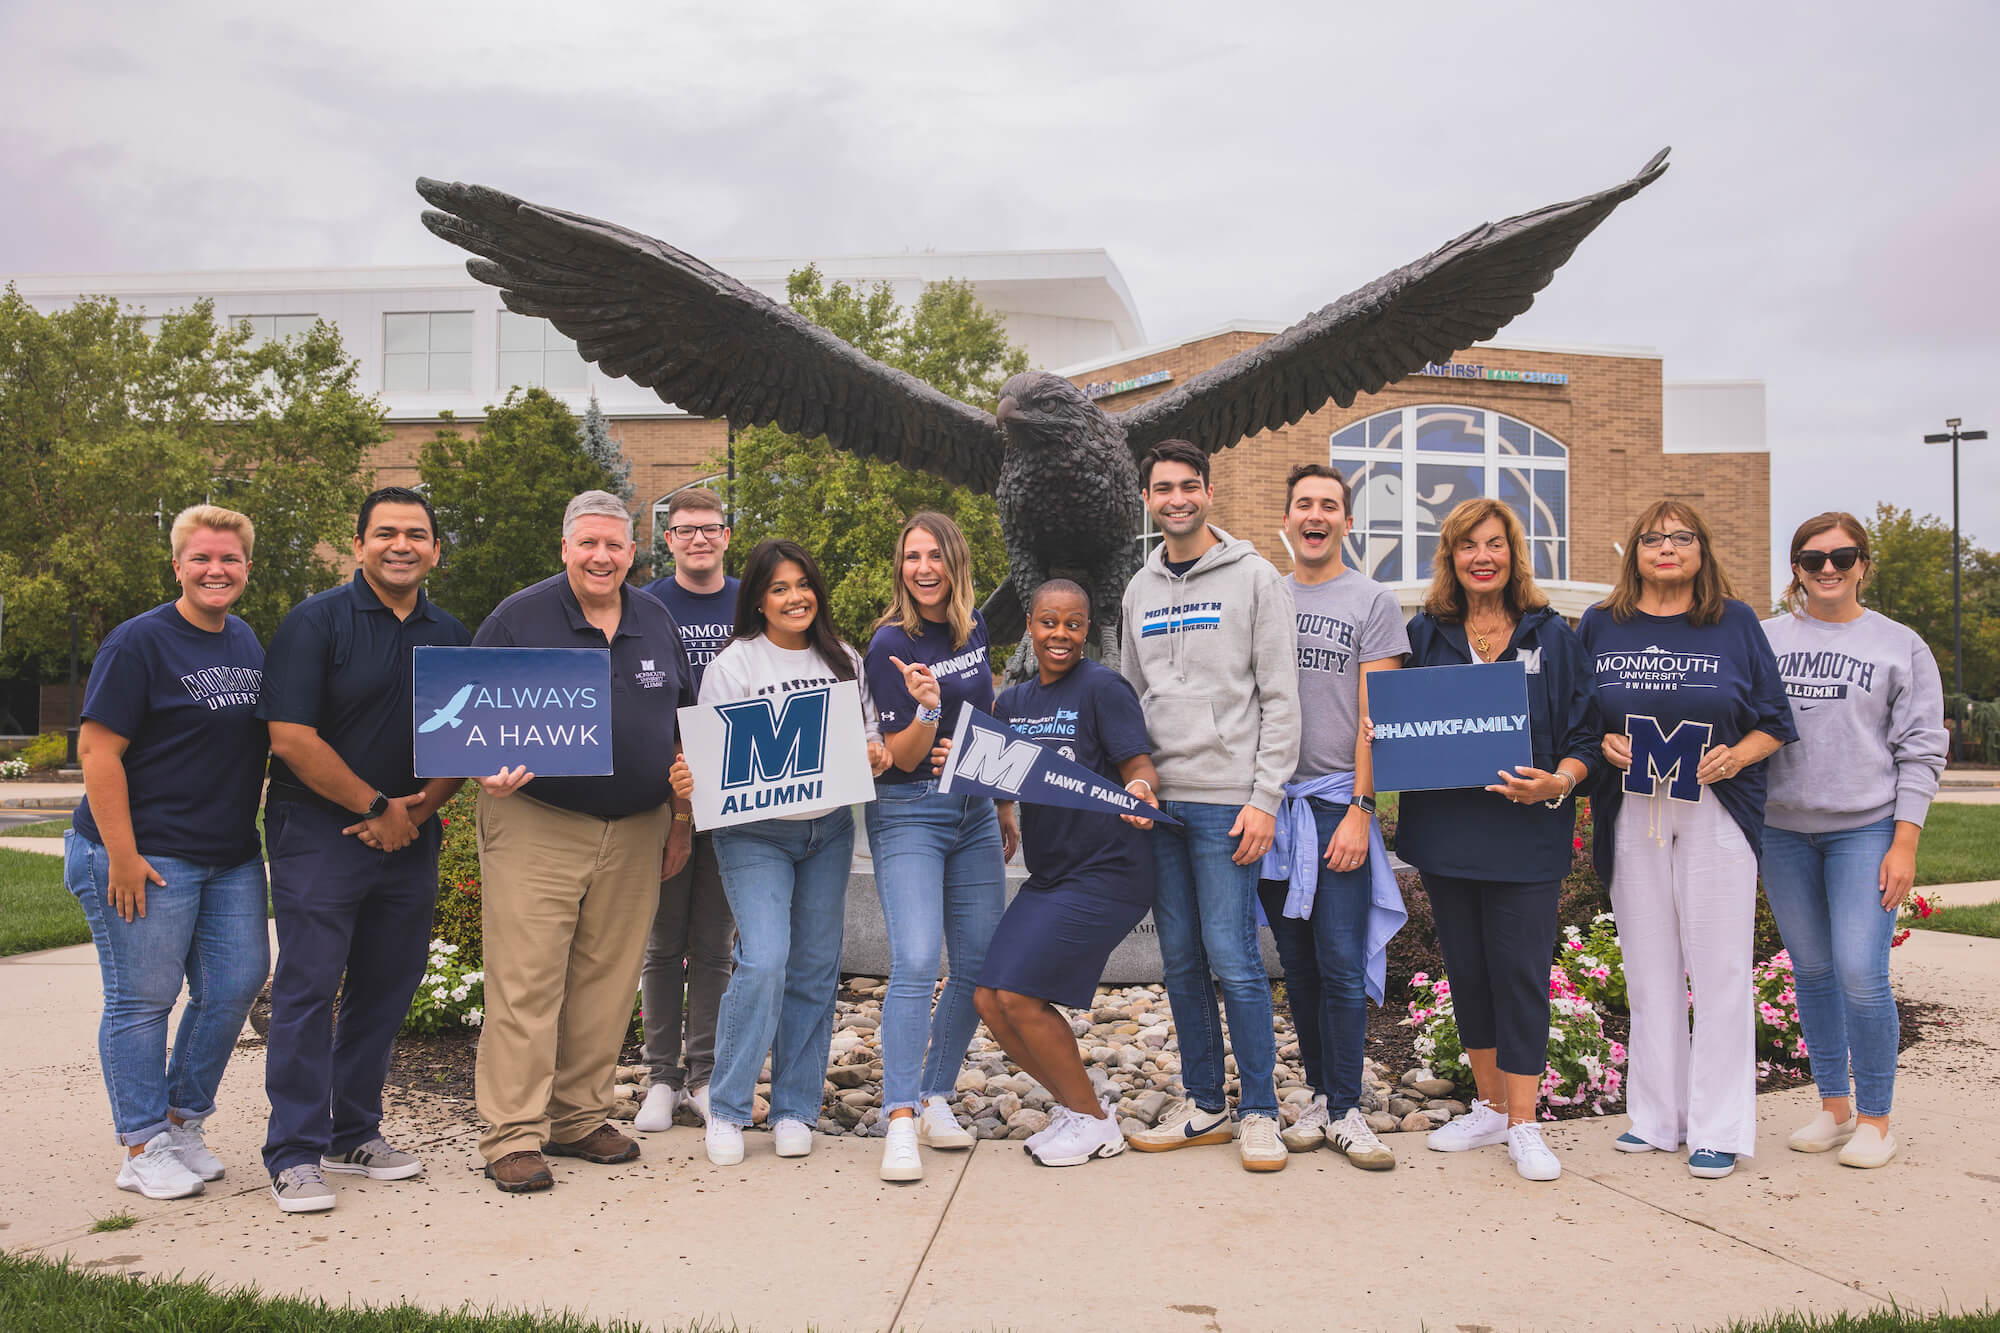 Alumni pose in front of the hawk statue by OceanFirst Bank Center